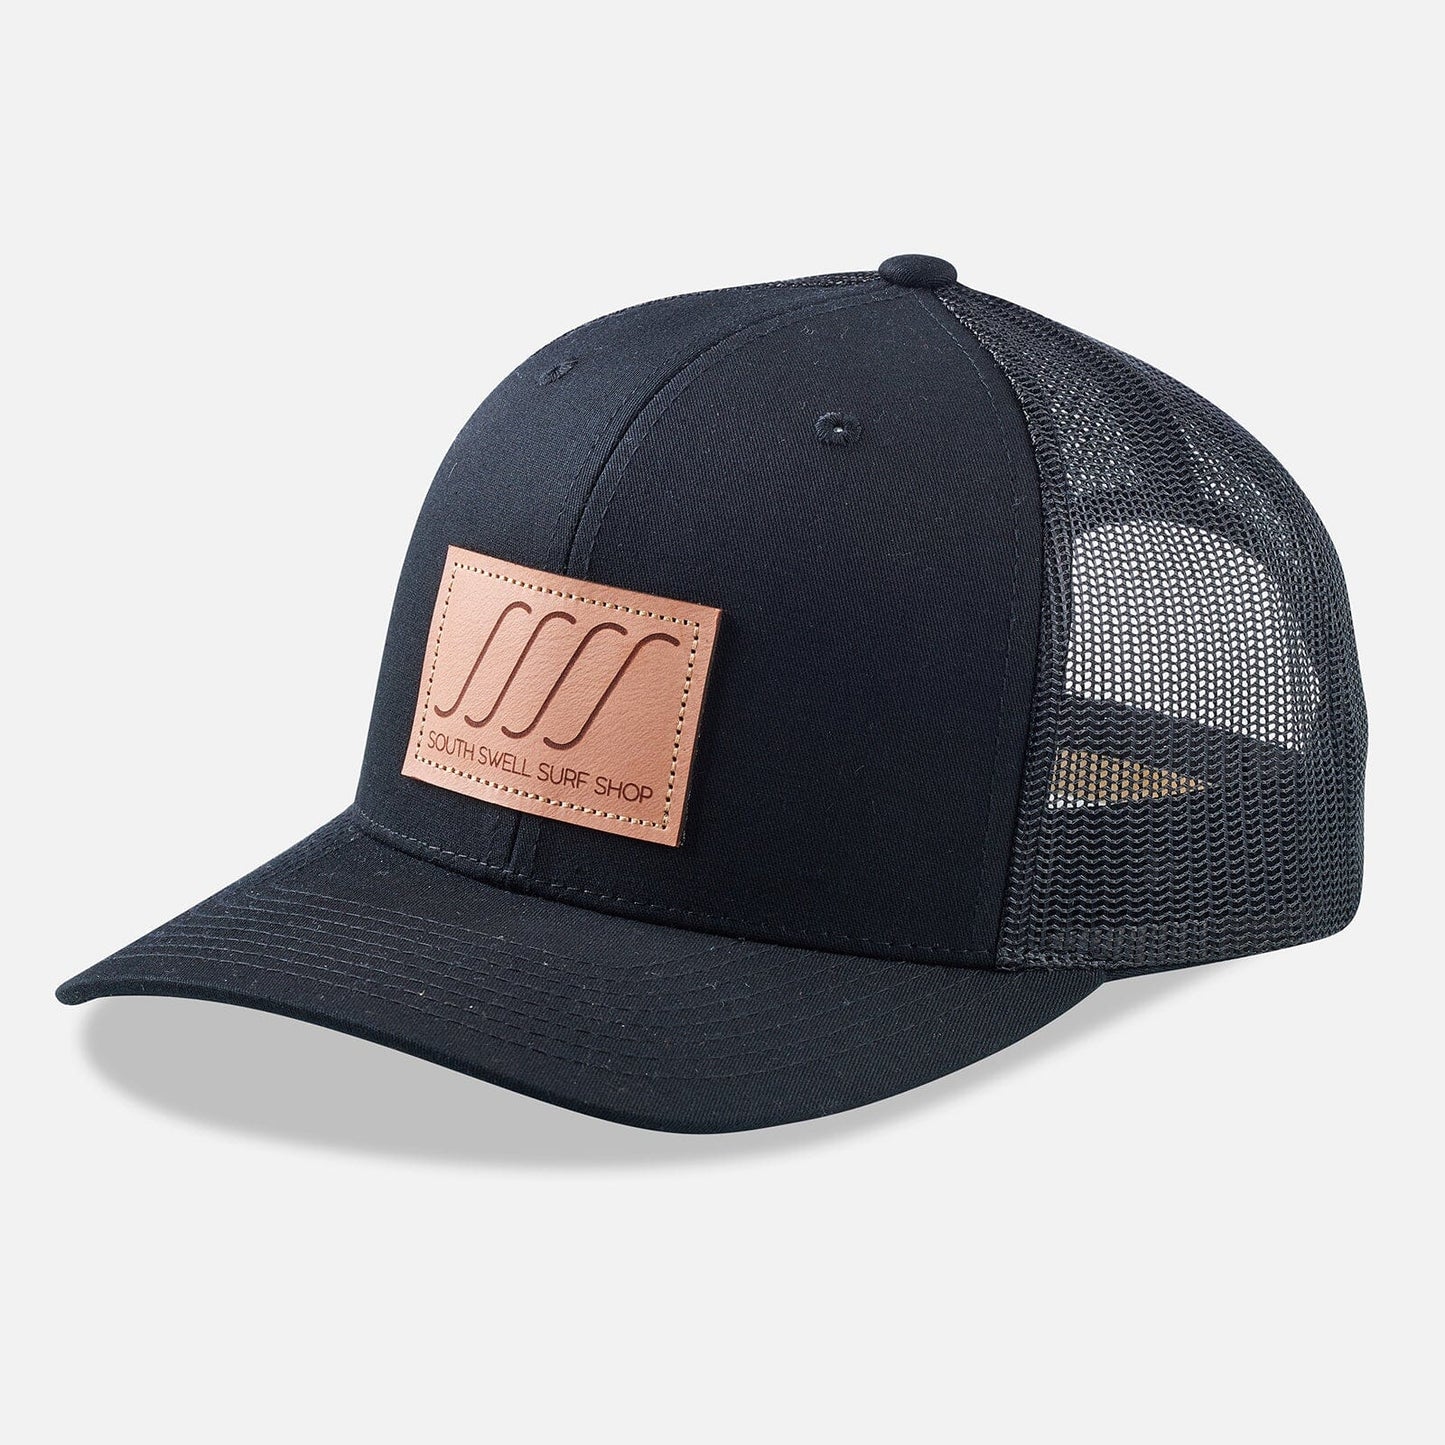 South Swell Leather Patch Trucker Hat Hats SOUTH SWELL Black 